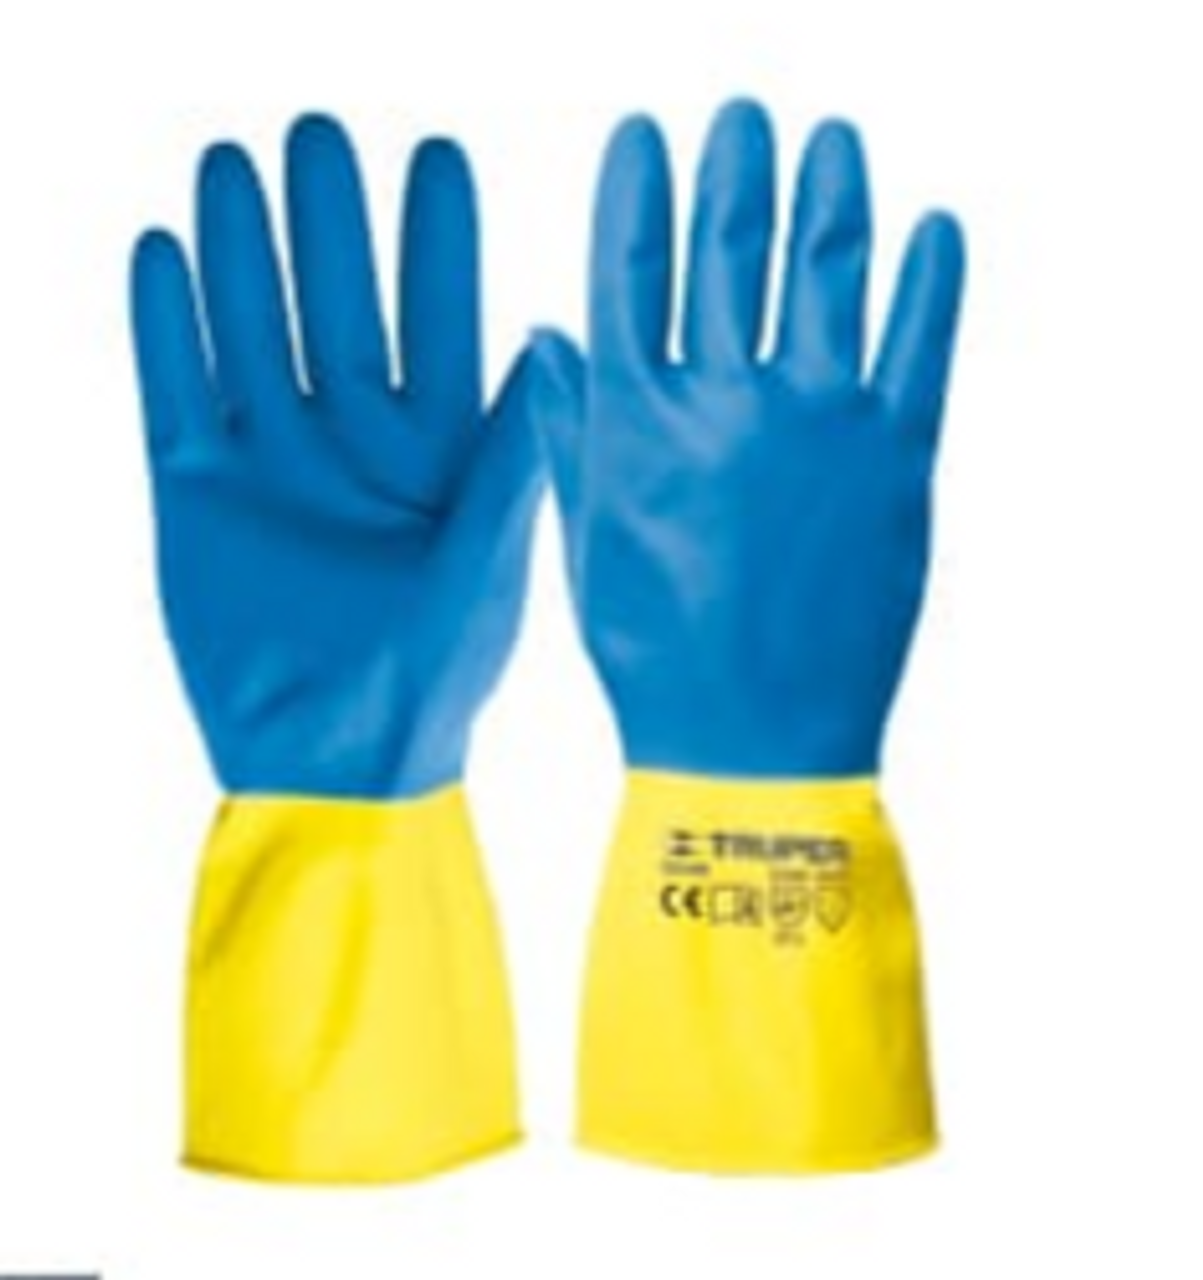 Truper Household Cleaning Latex Gloves, Medium Latex Reinforced Cleaning Gloves 2 Pack #13268